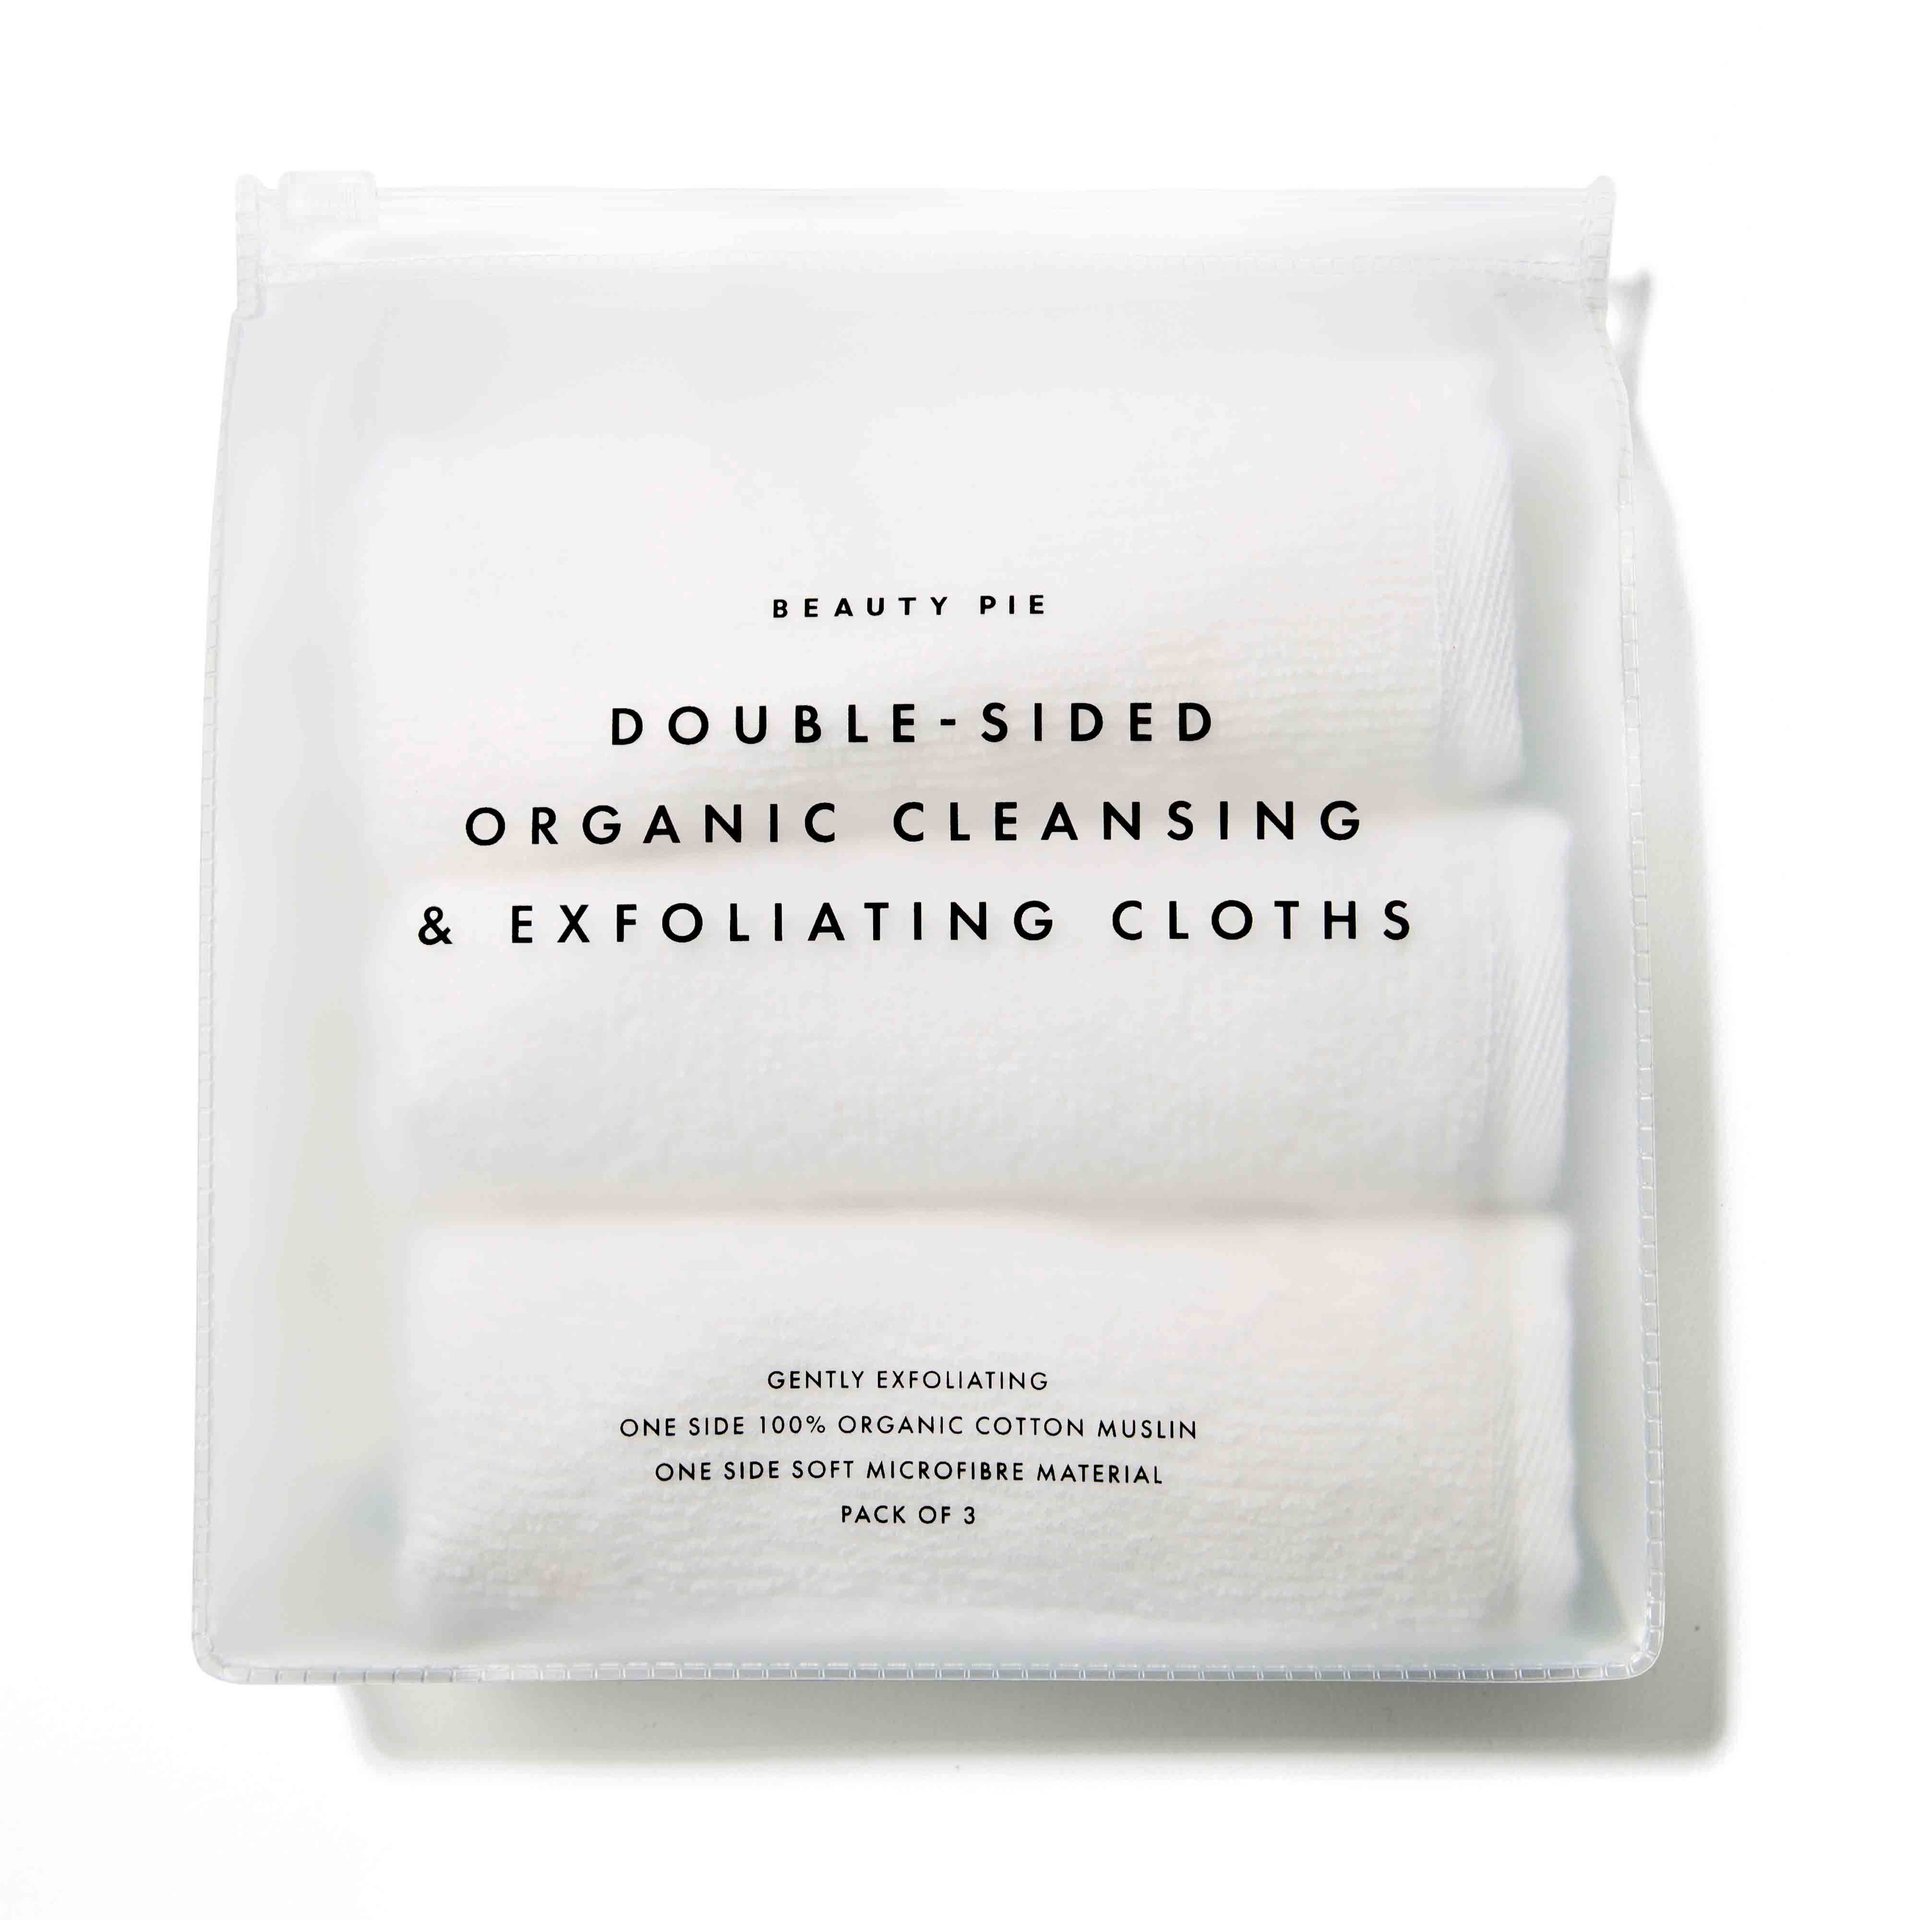 Double-Sided Organic Cleansing & Exfoliating Cloths